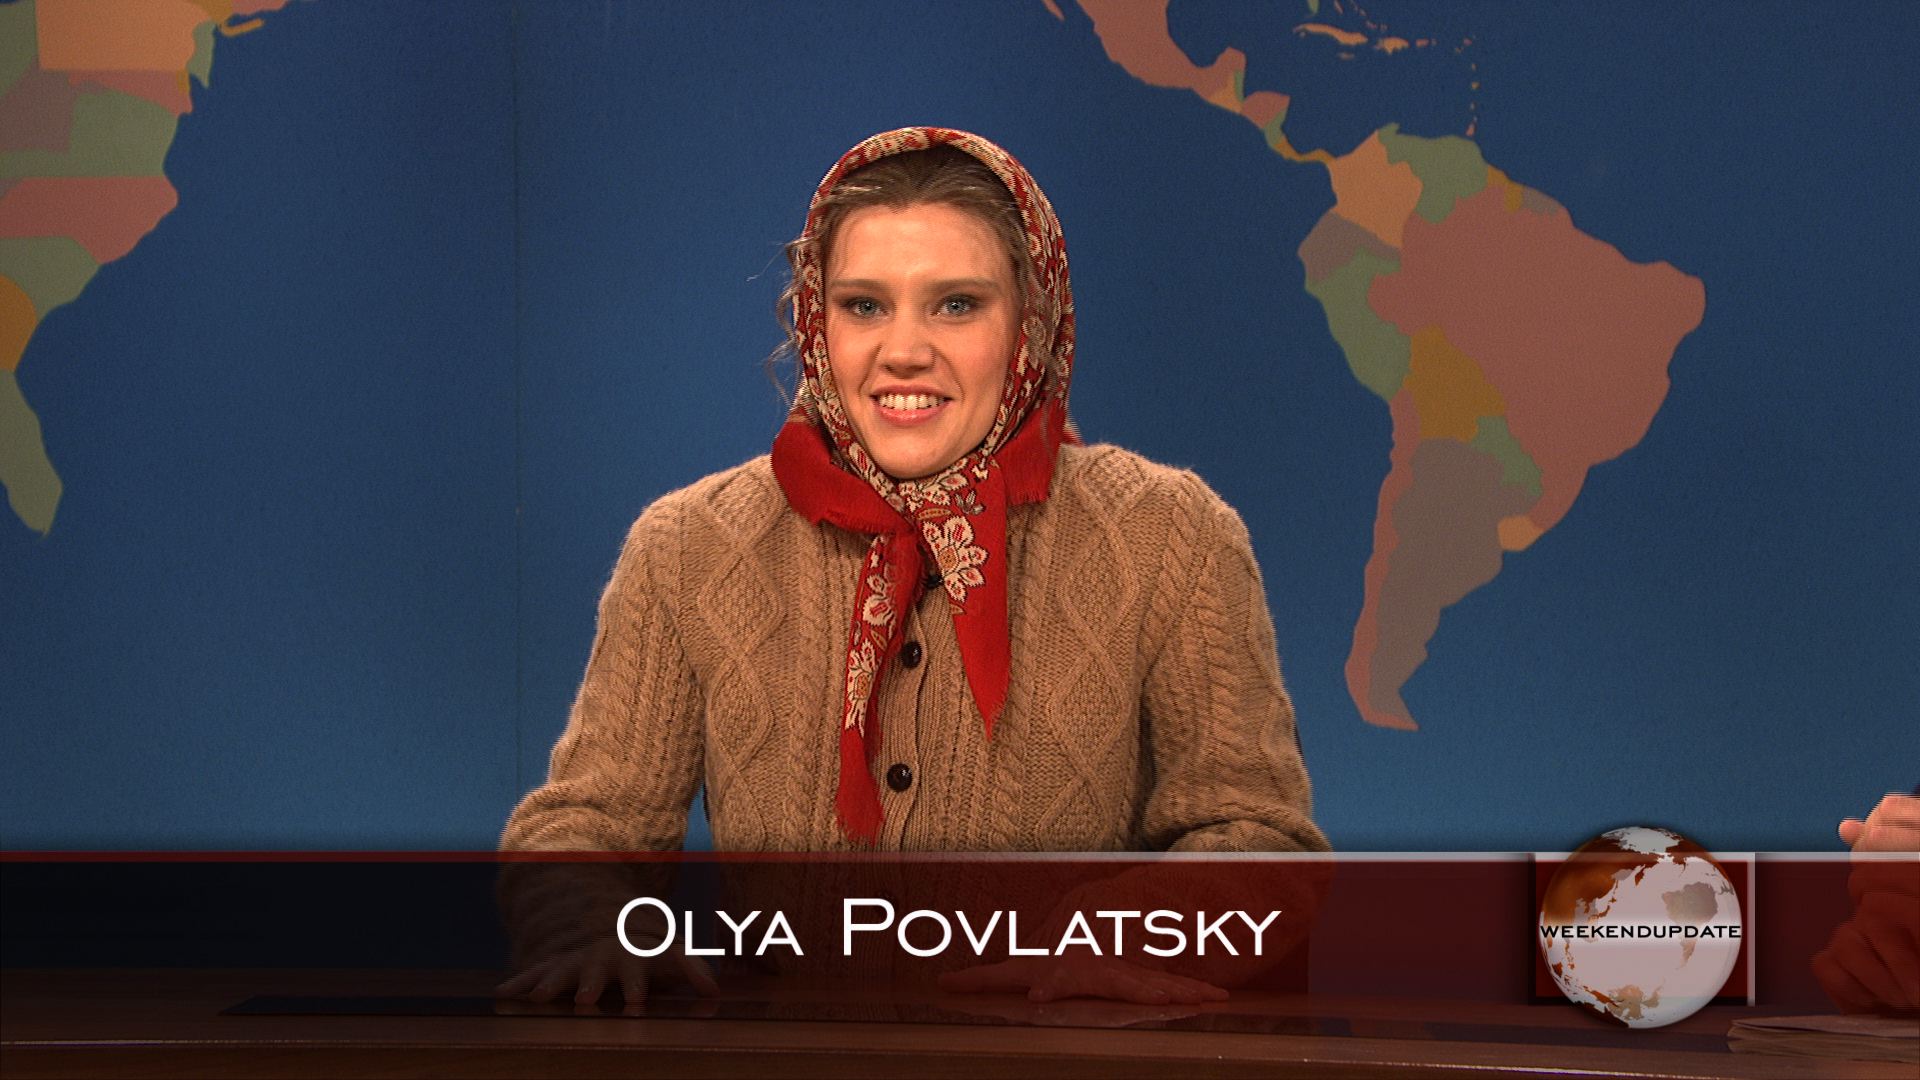 Watch Weekend Update Olya Povlatsky On The Russian Meteor Explosion From Saturday Night Live